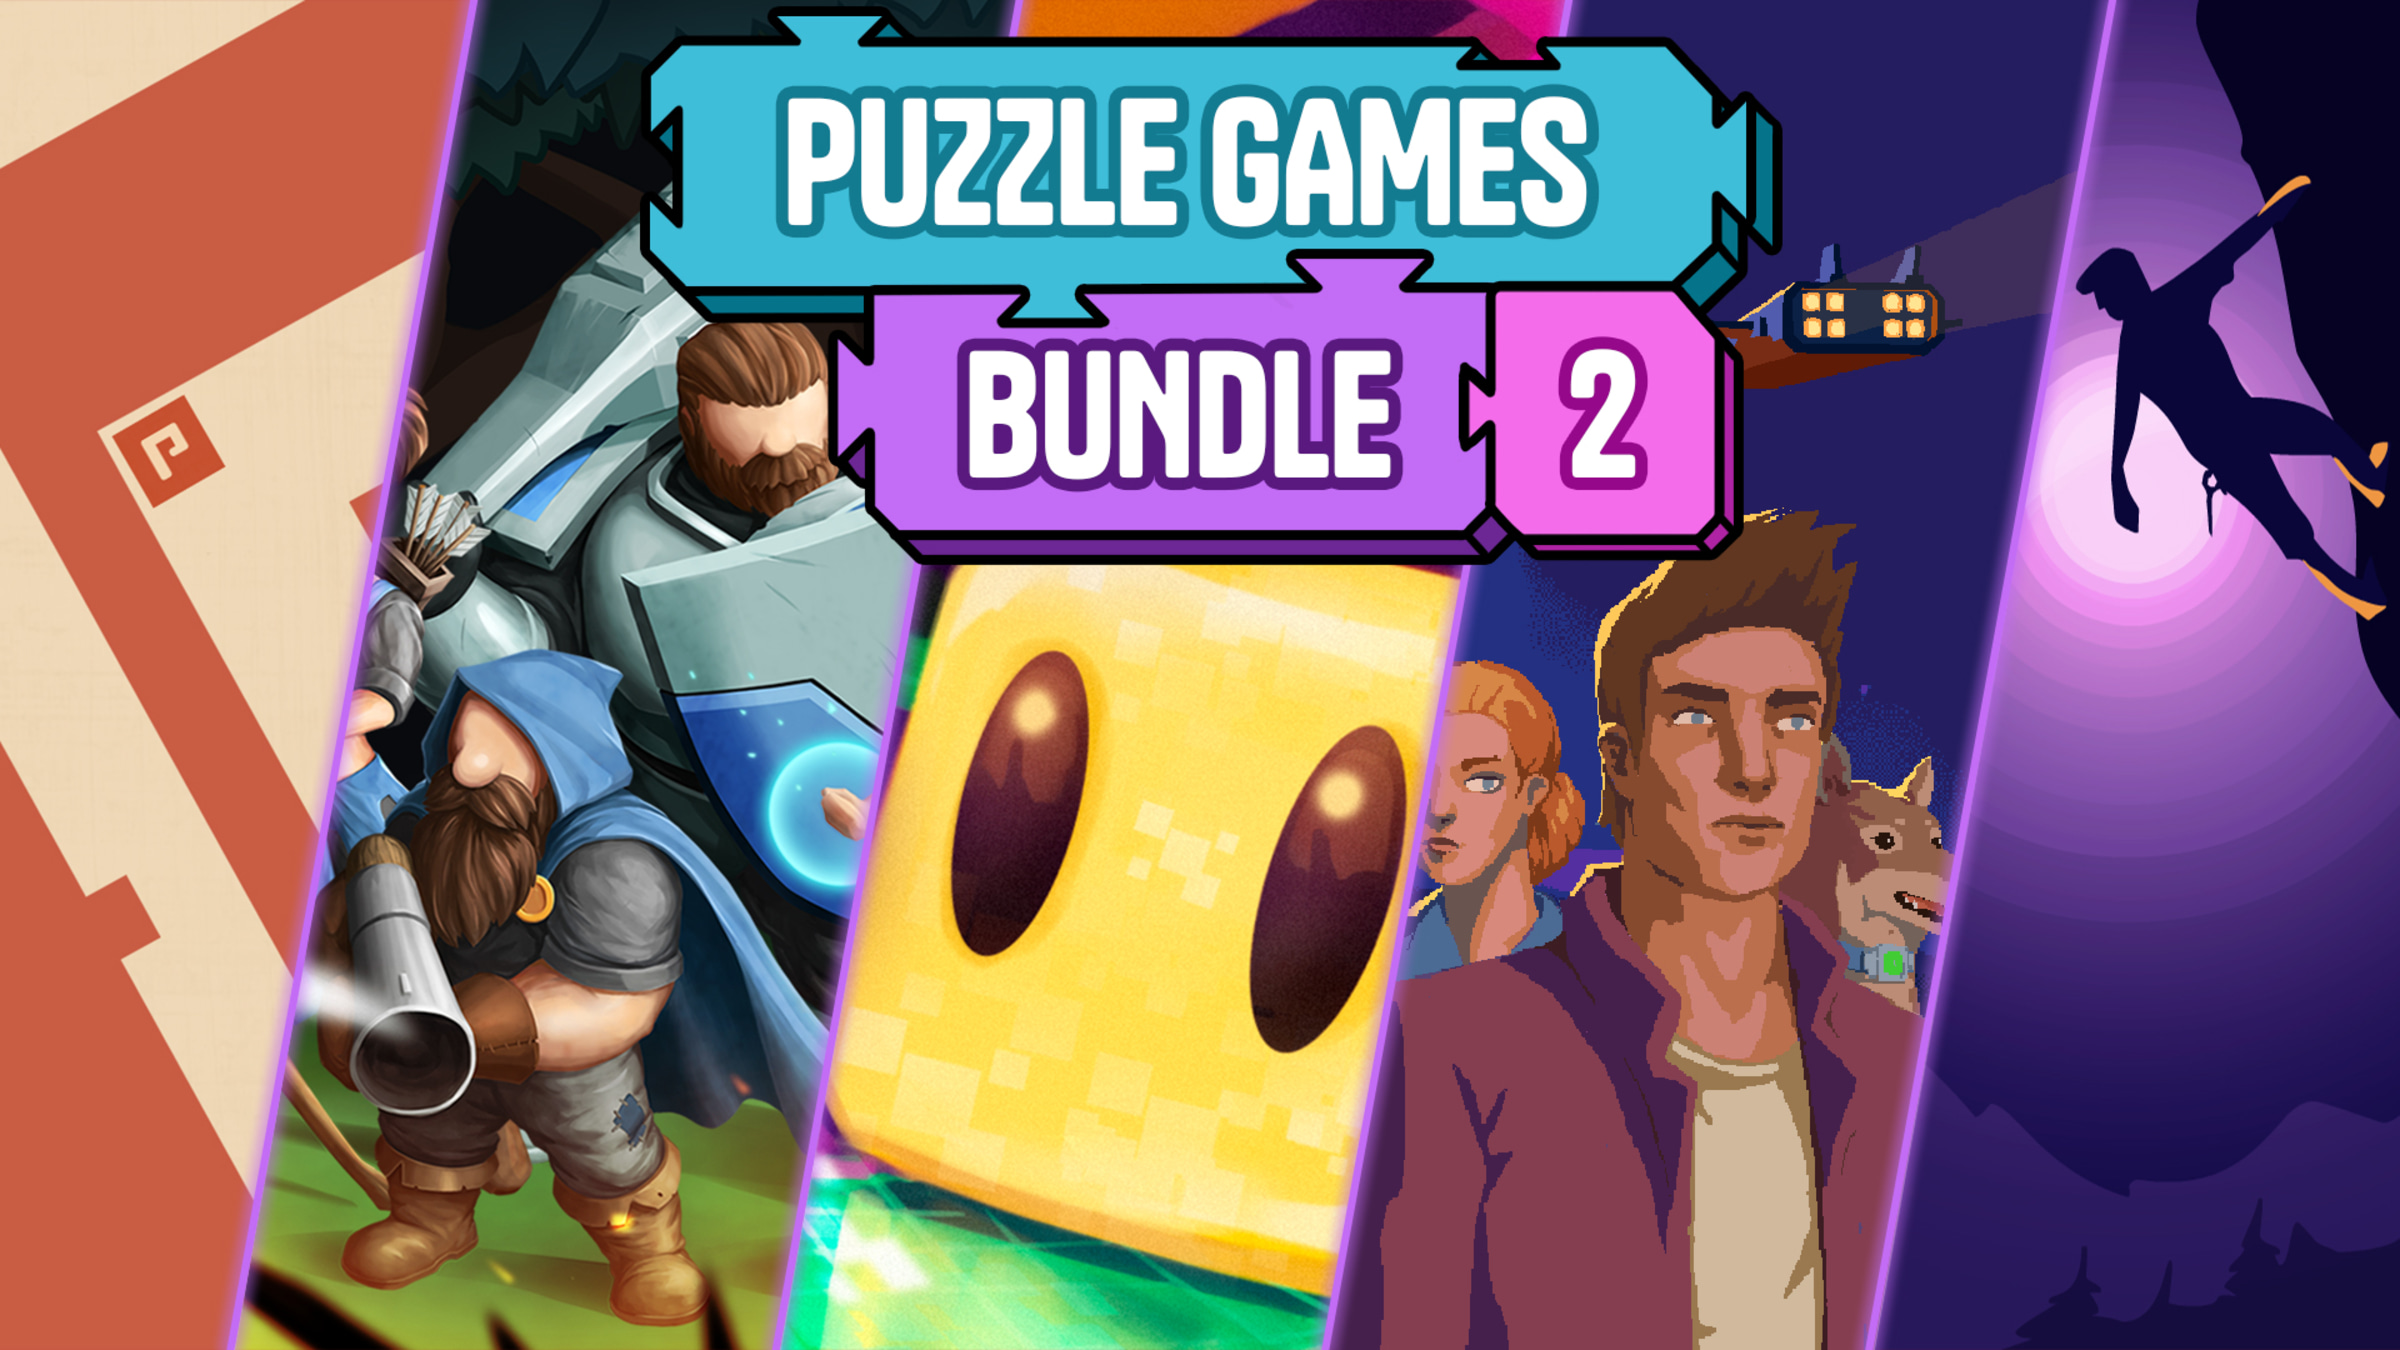 Puzzle Games Bundle (5 in 1) for Nintendo Switch - Nintendo Official Site